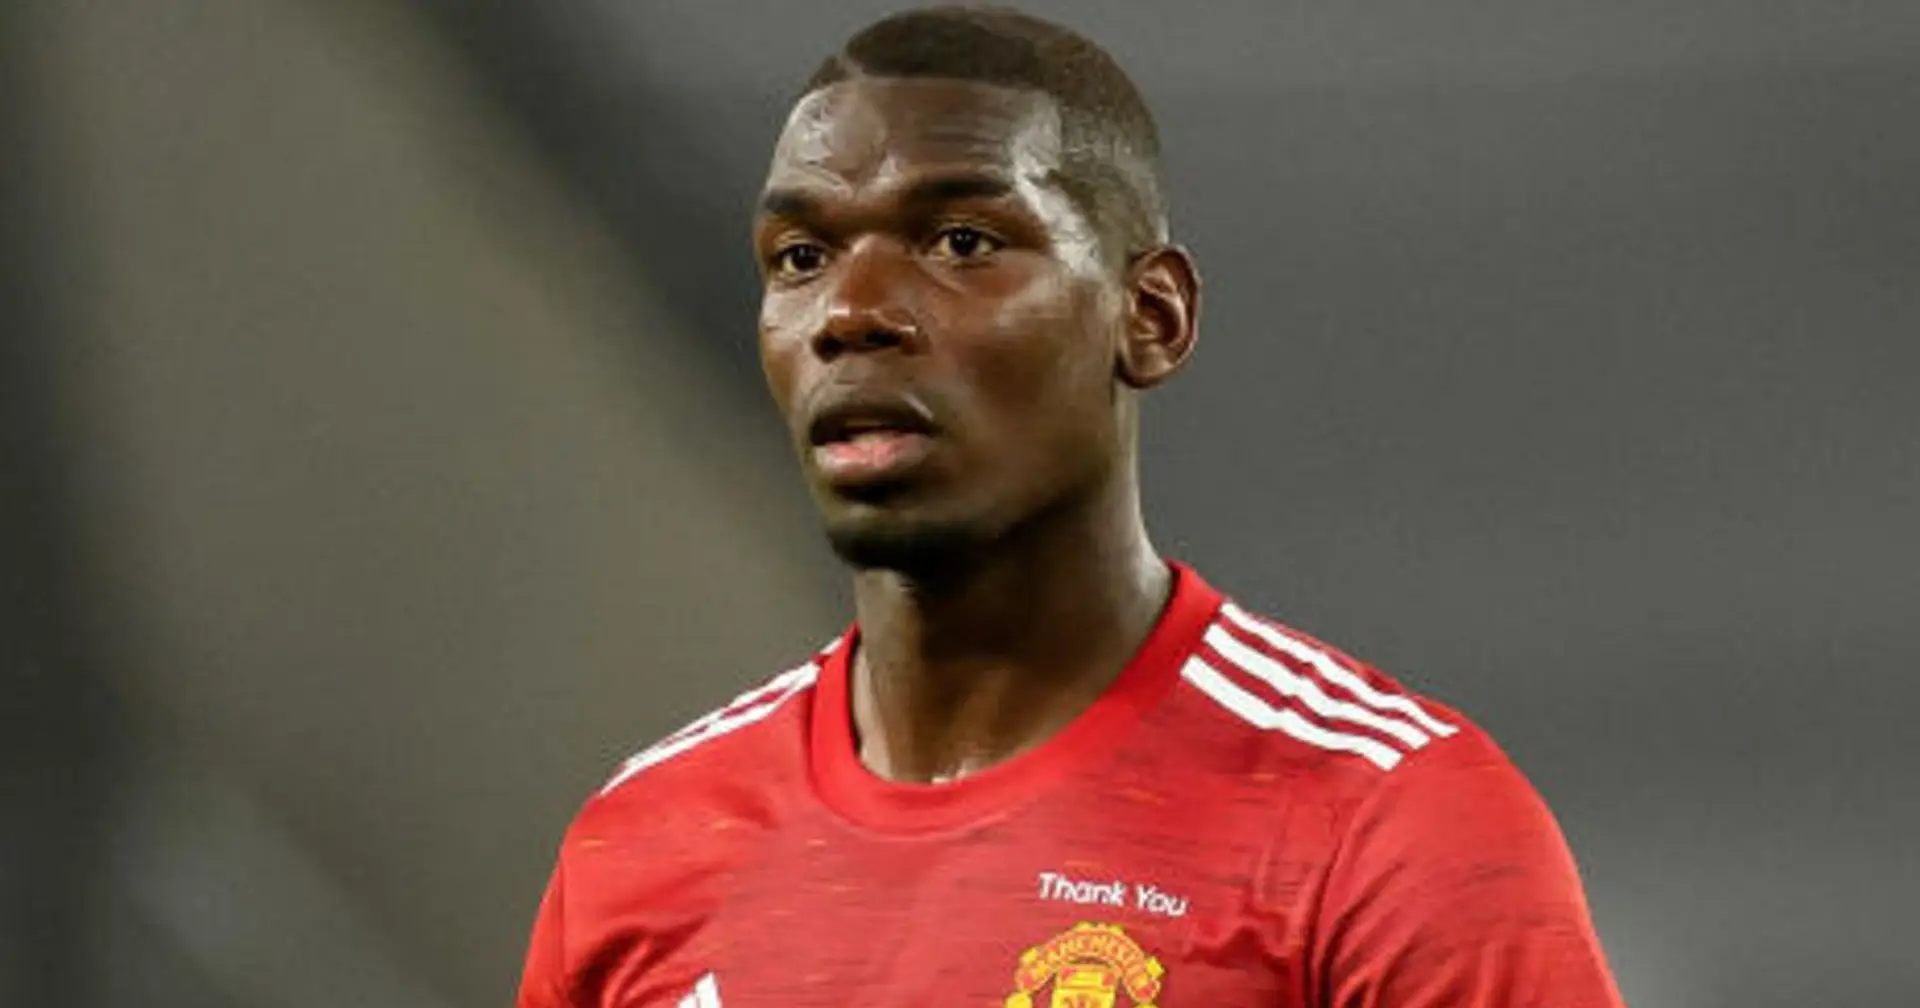 Fabrizio Romano: United plan to offer Pogba new contract even after recent comments